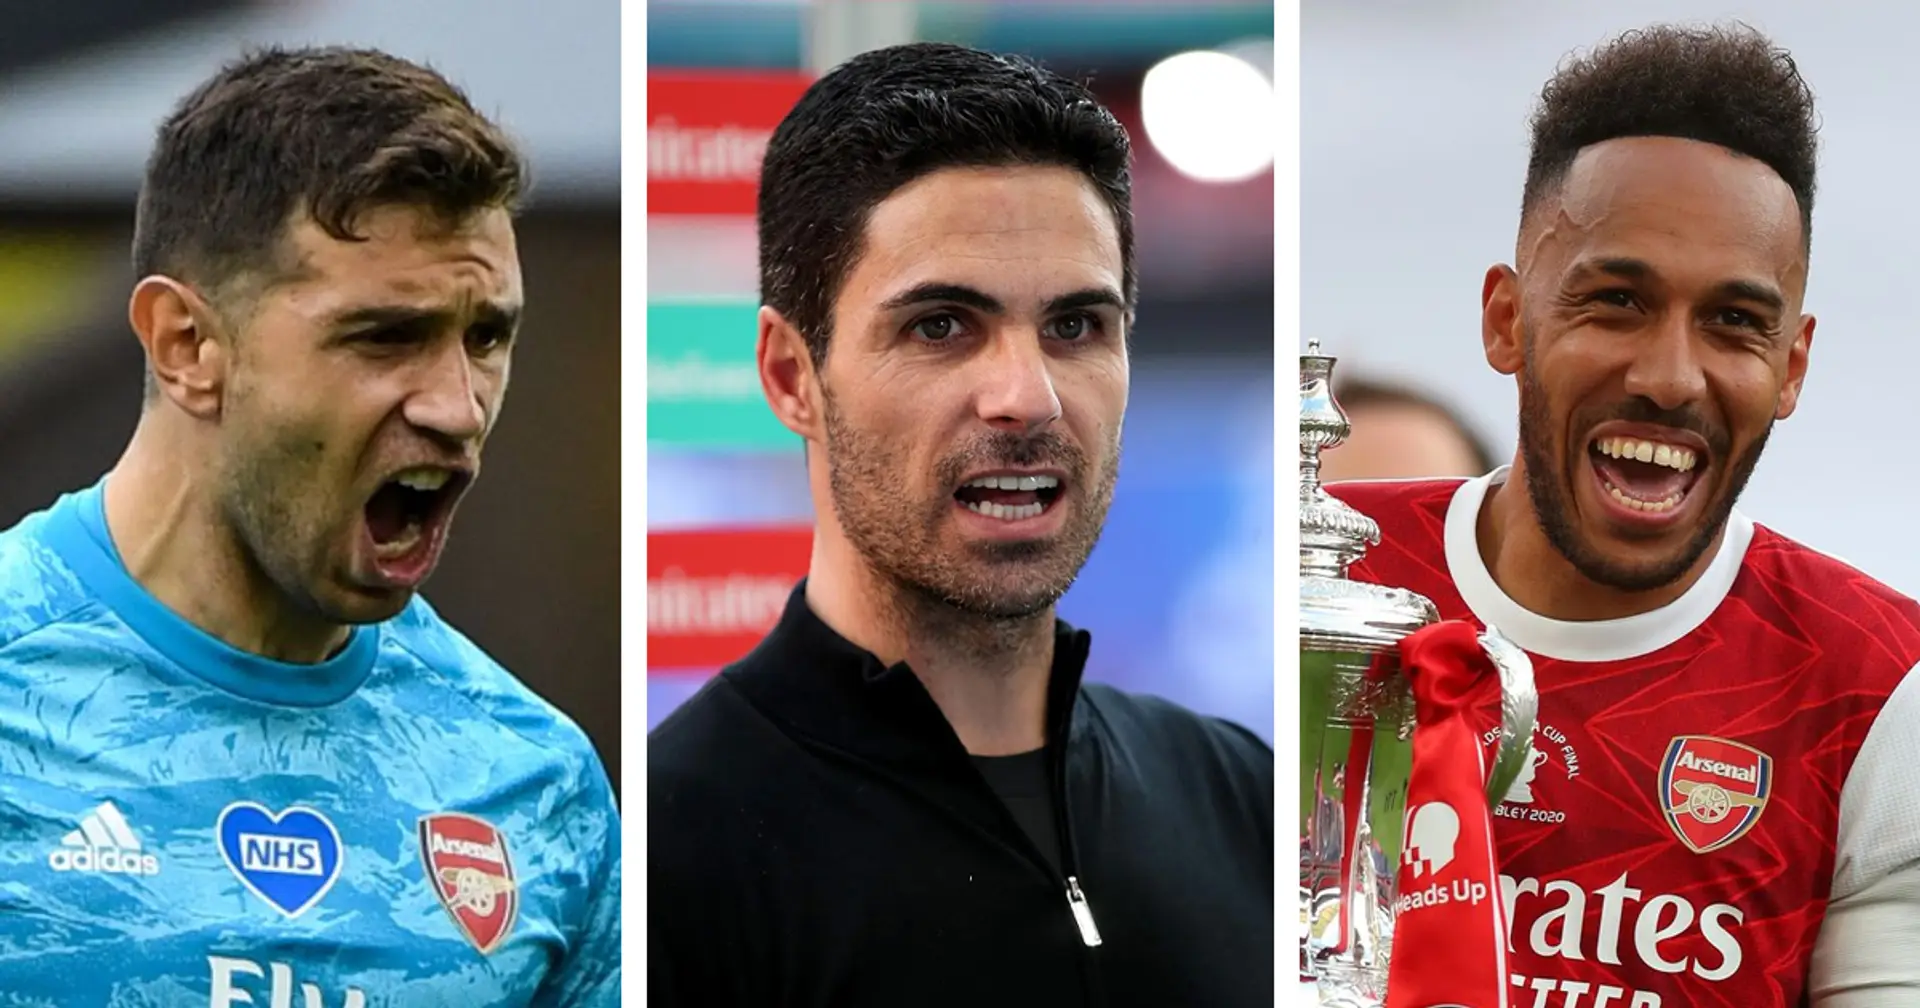 Times: Arsenal set to accelerate talks with Auba and Martinez, Arteta prioritises signing 3 new players in summer